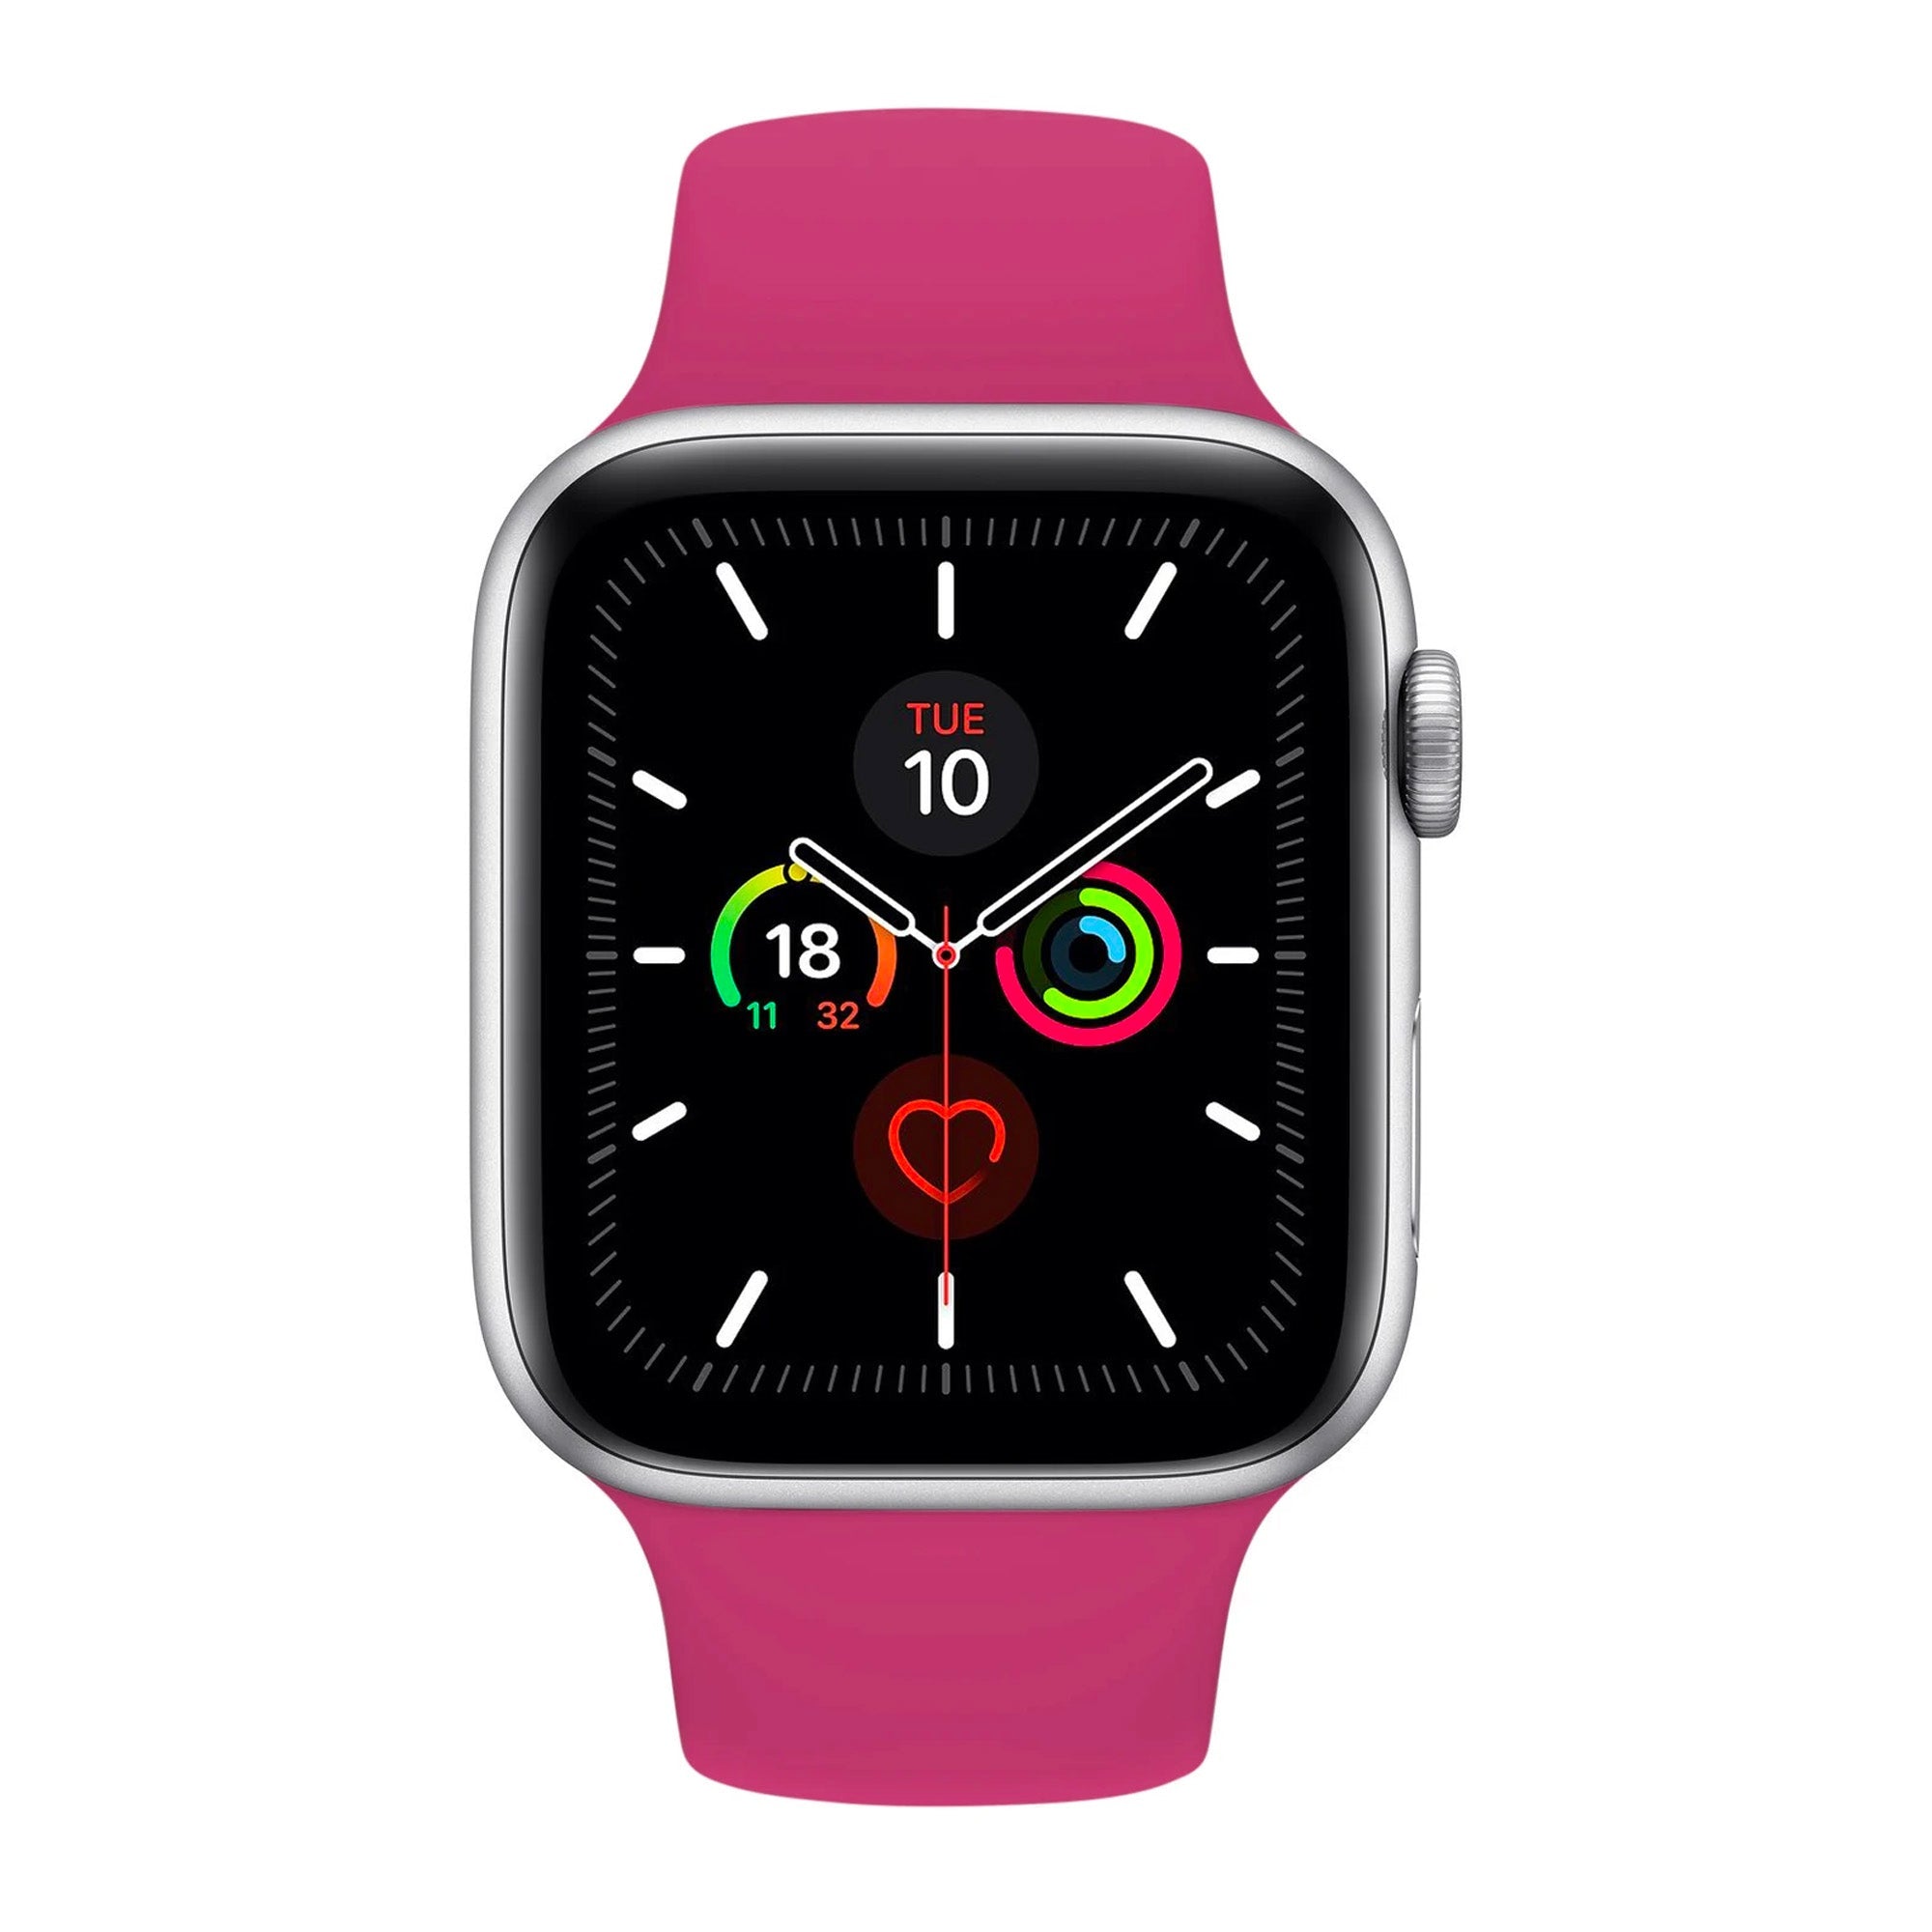 Dragon Fruit Silicone Band for Apple Watch Silicone Bands   Accessories Gifts UK